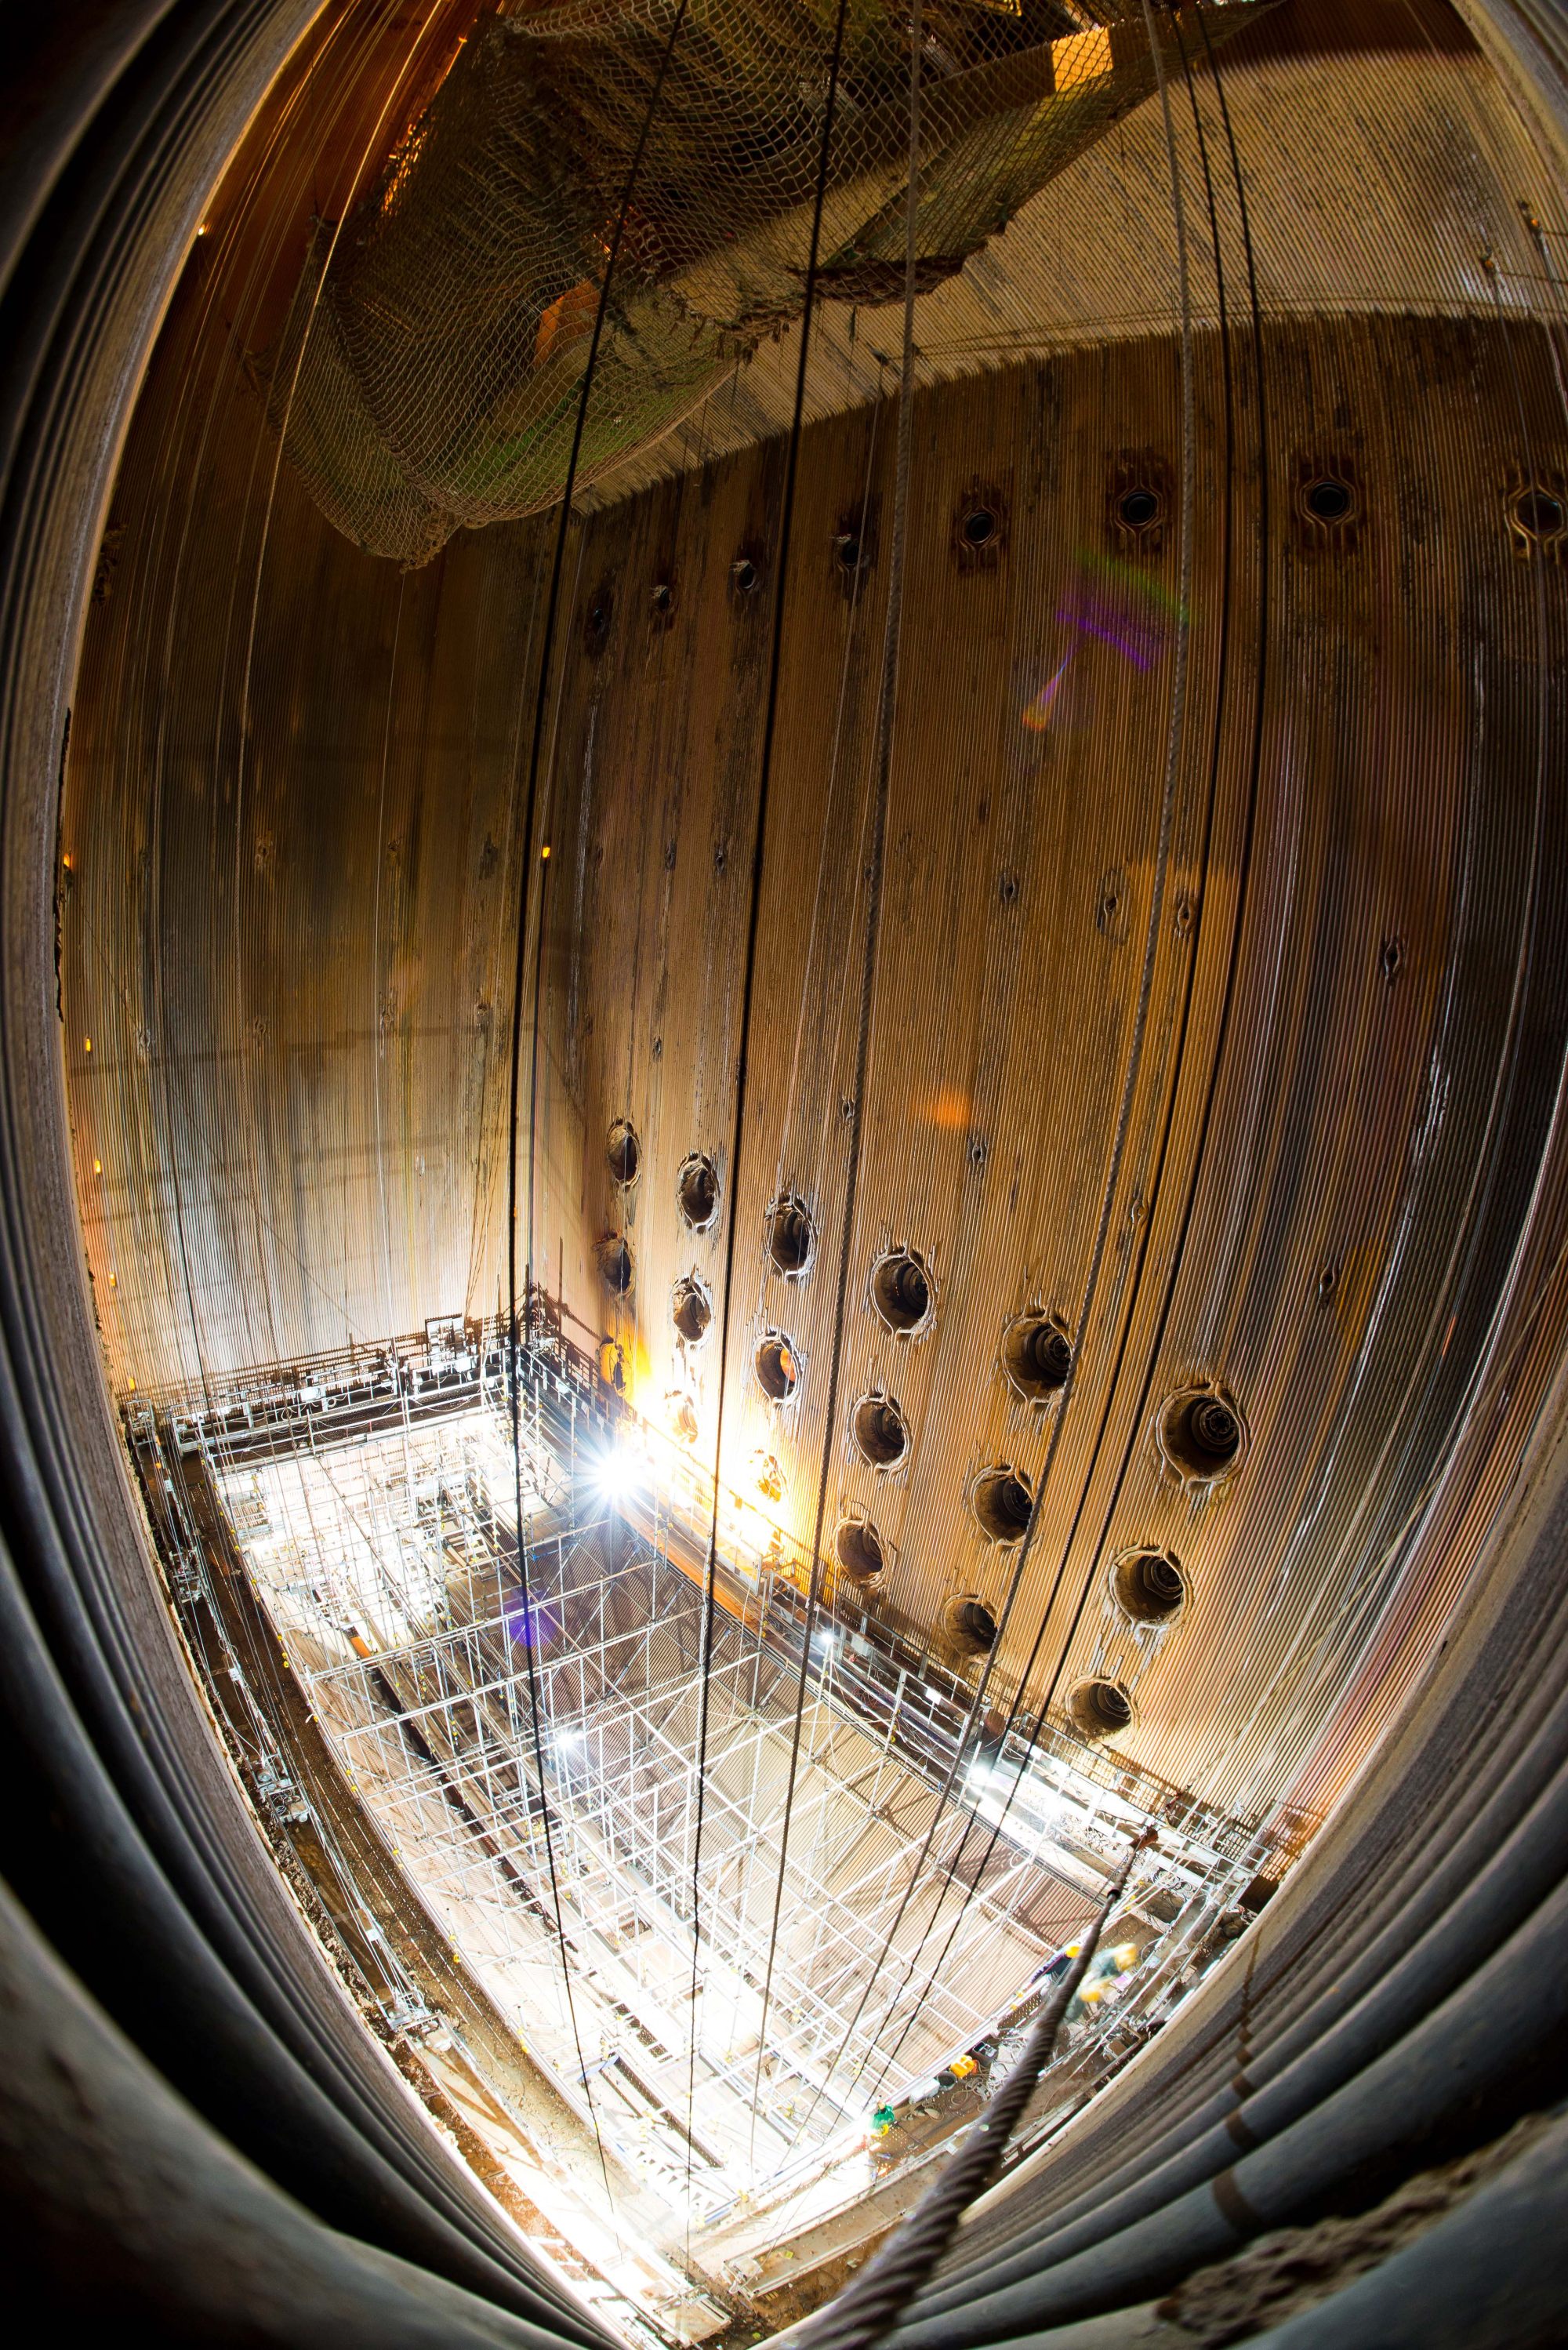 It used to take 12 days for engineers to set up scaffolding at an 80-metre-tall boiler. Photo: Handout